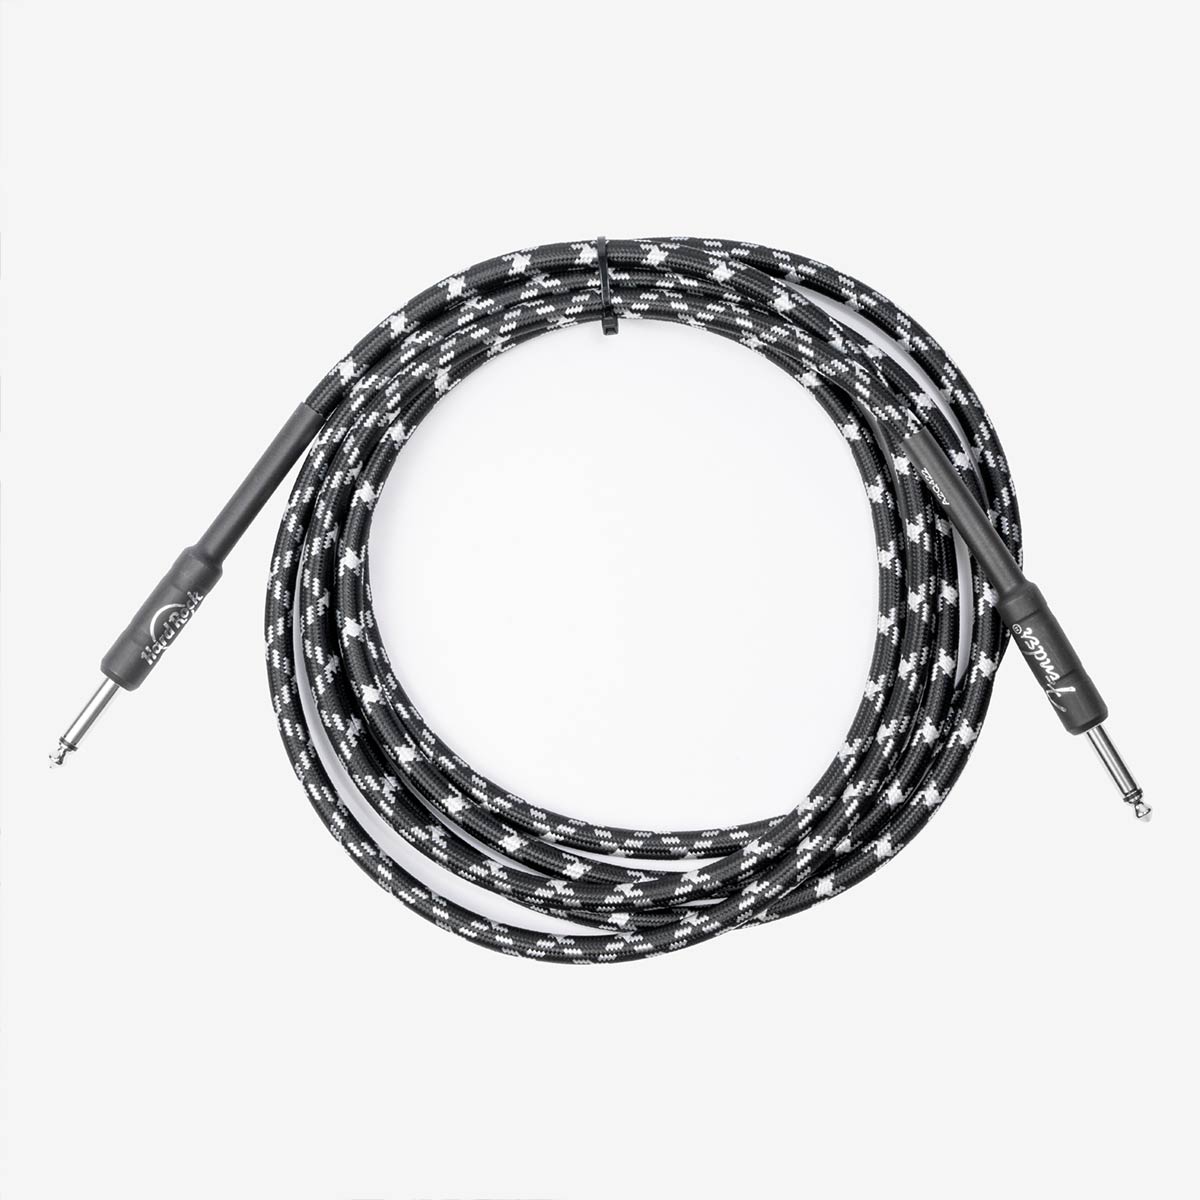 Fender x Hard Rock Instrument Cable 10 Inch in Black Tweed and Camo image number 6